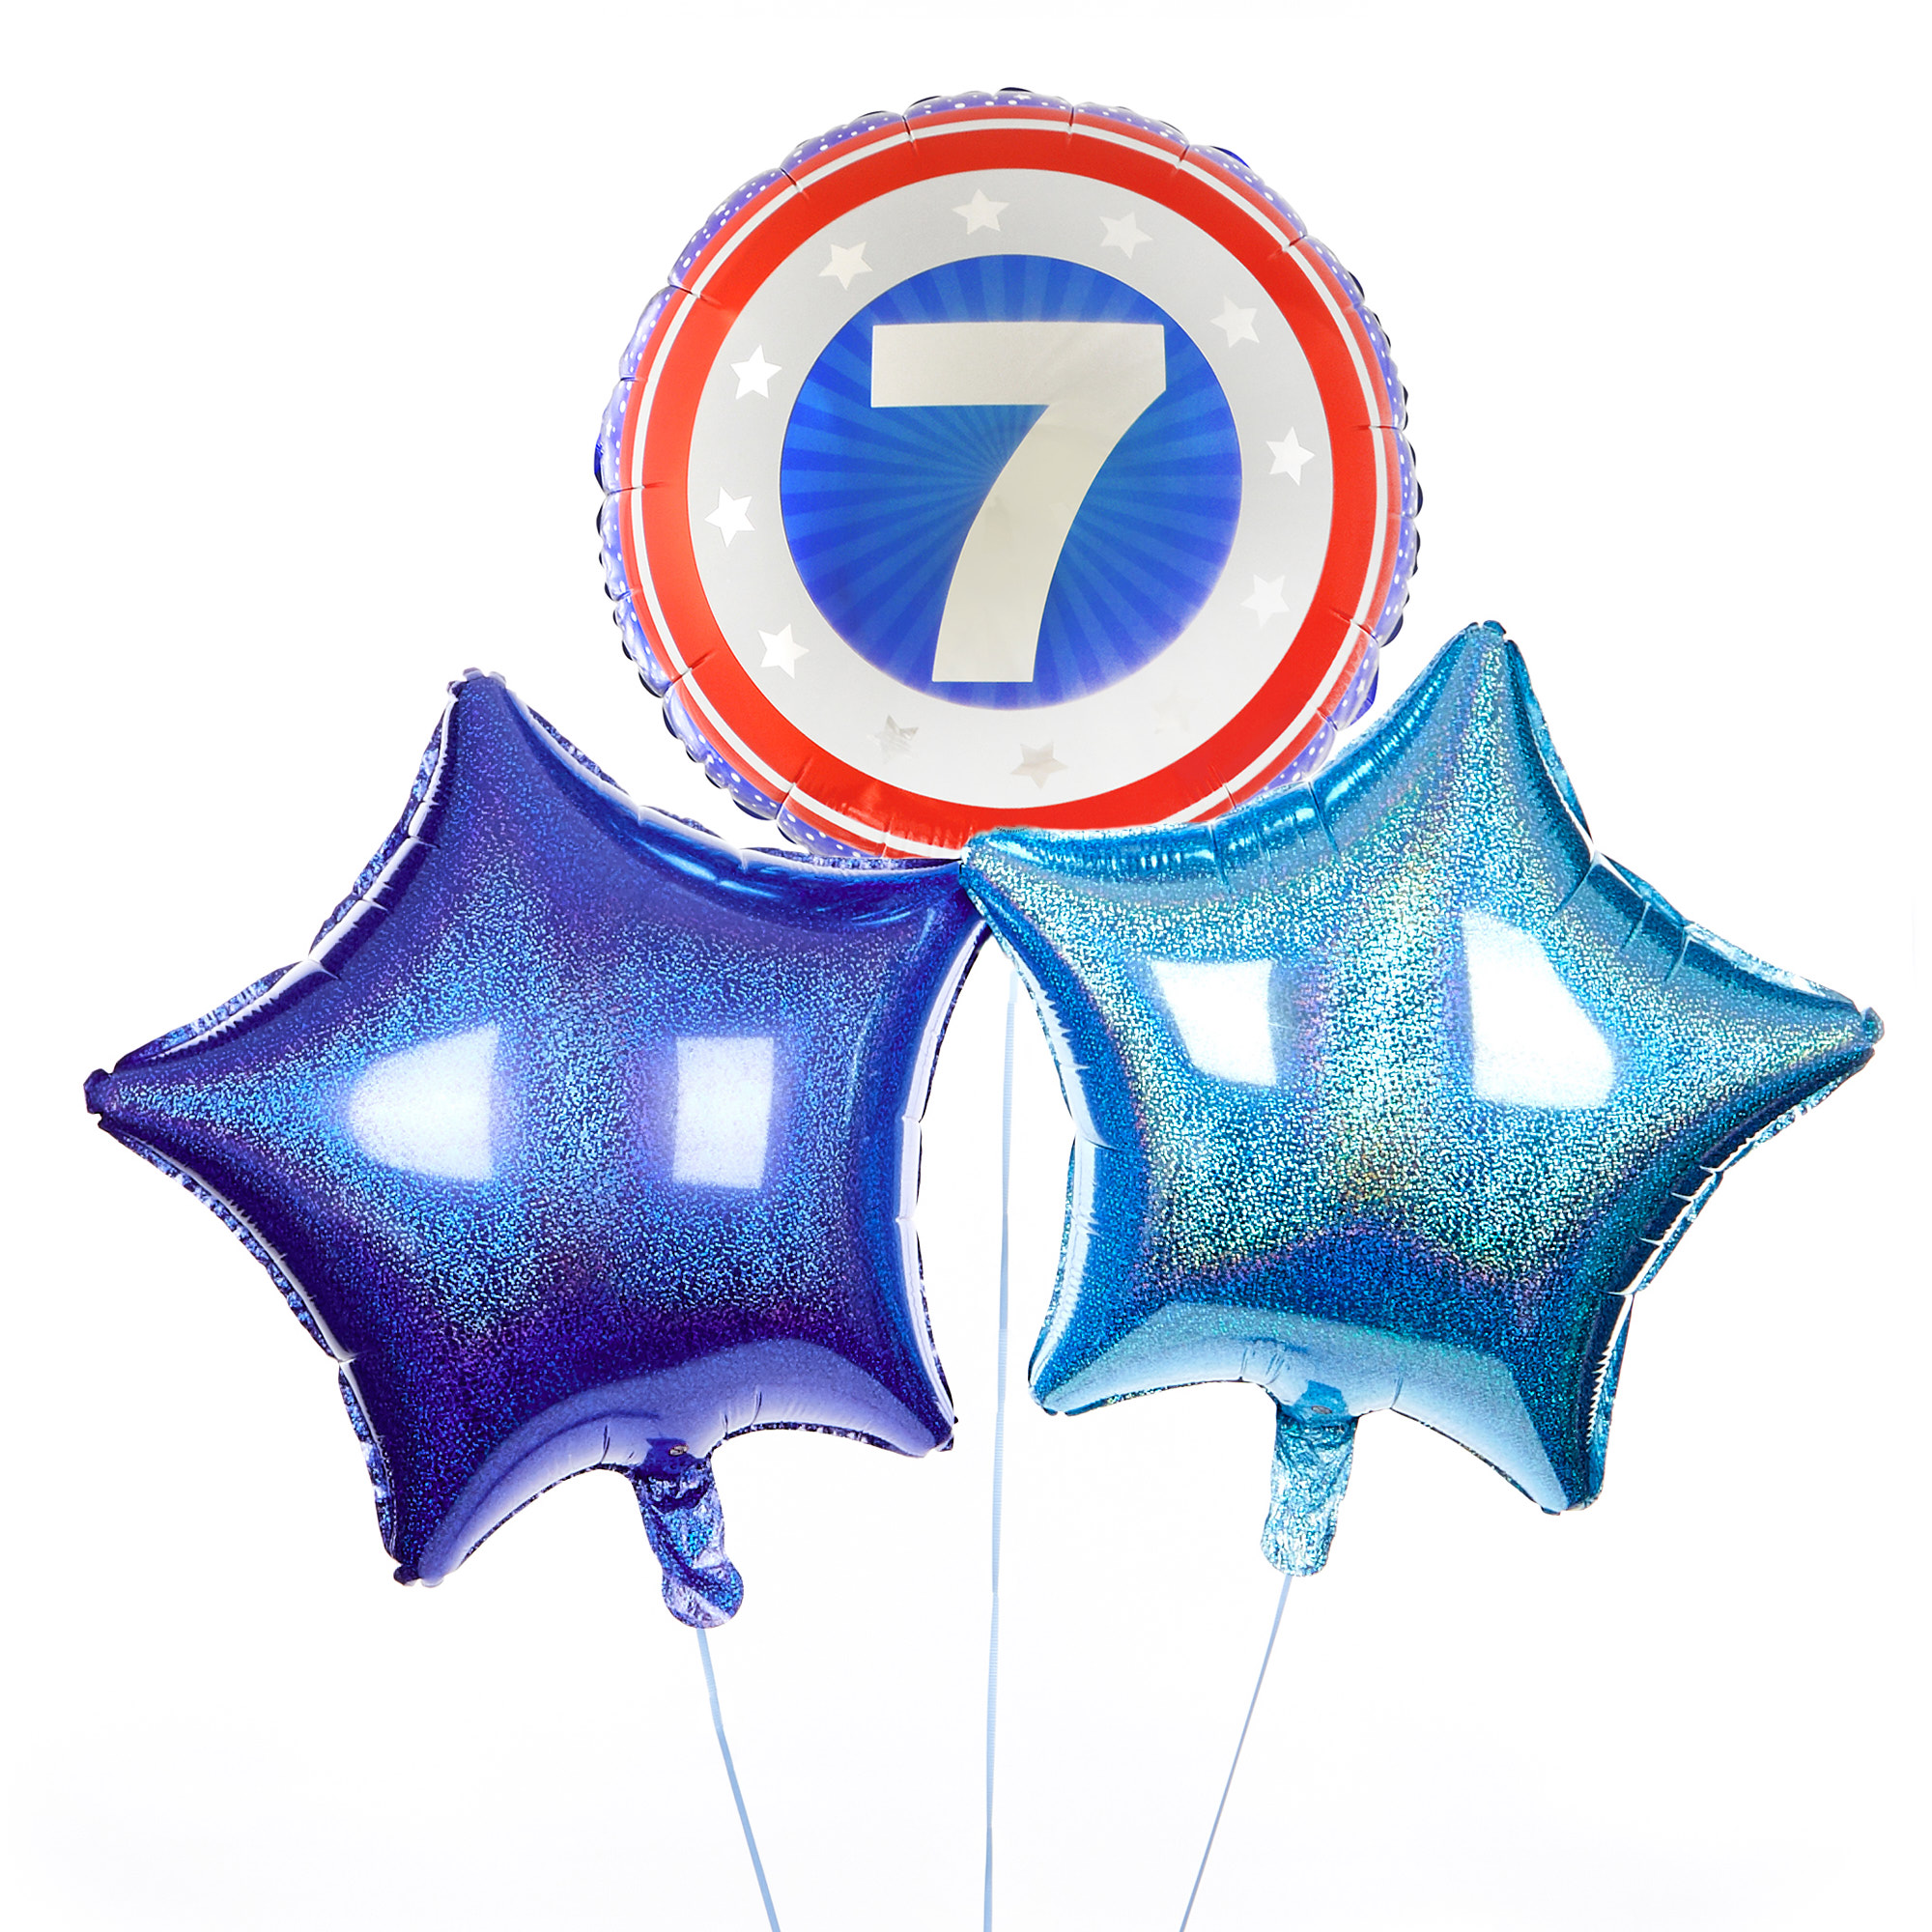 Superhero Shield 7th Birthday Balloon Bouquet - DELIVERED INFLATED!